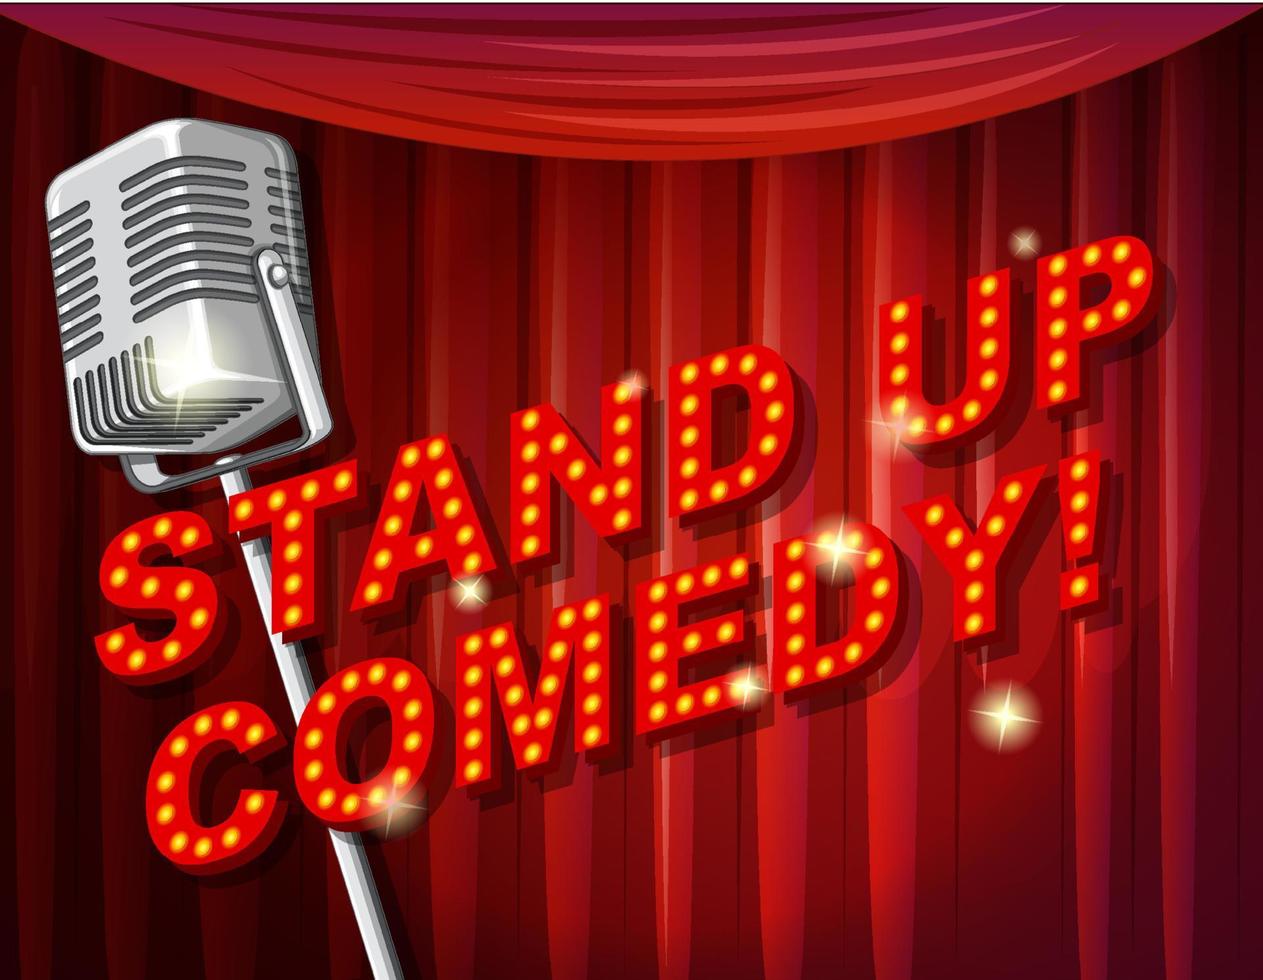 Stand up comedy banner with vintage microphone vector